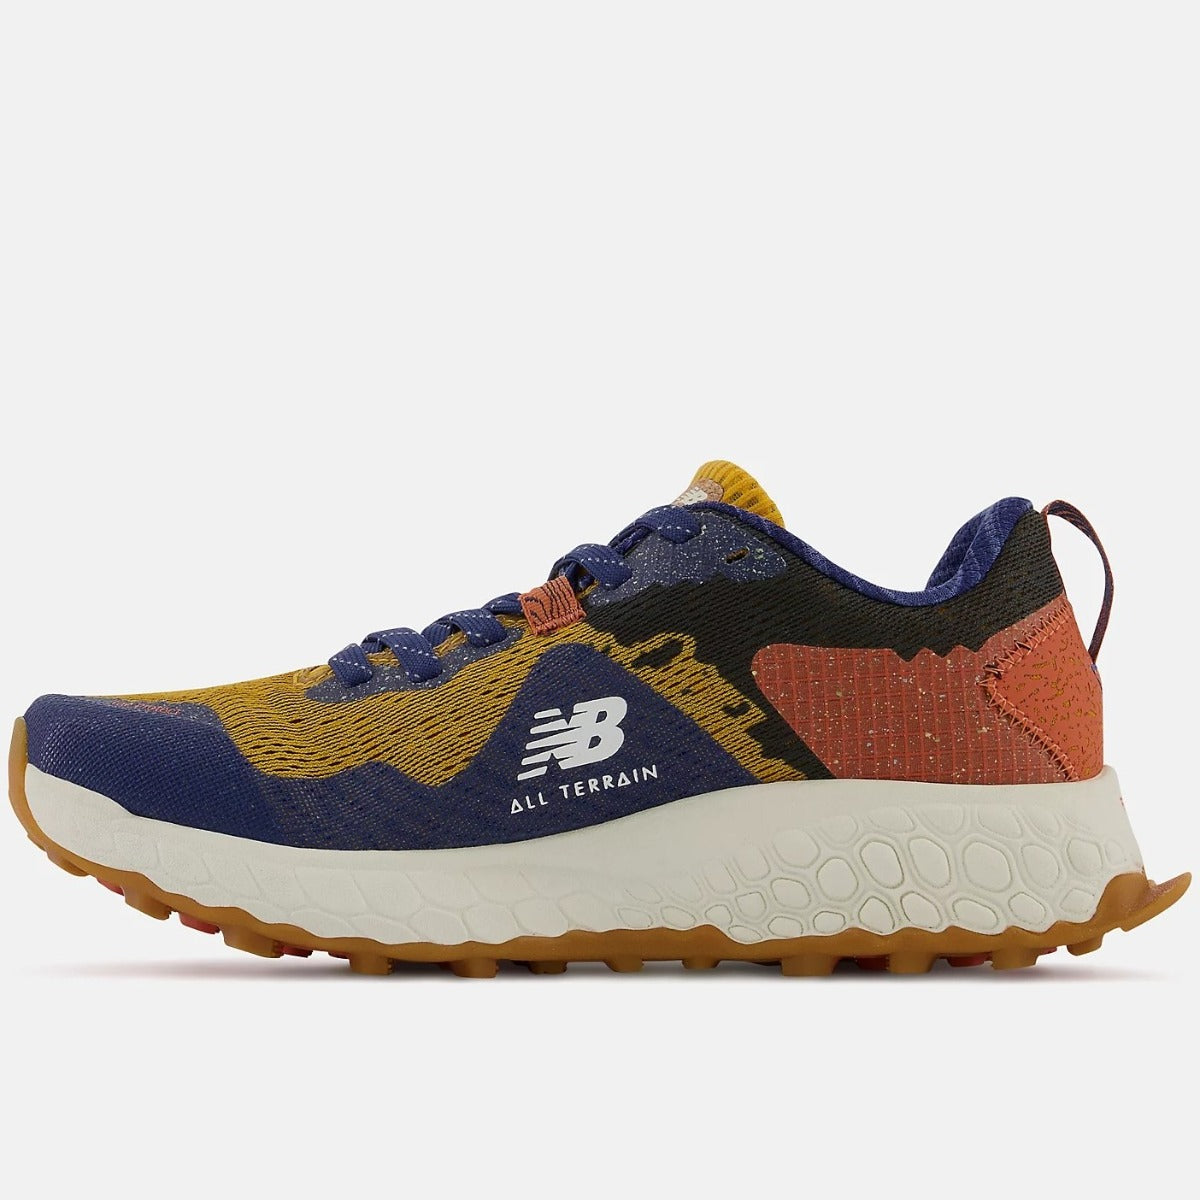 New Balance Hierro V7 Trail Shoes Ladies (Golden Hour)